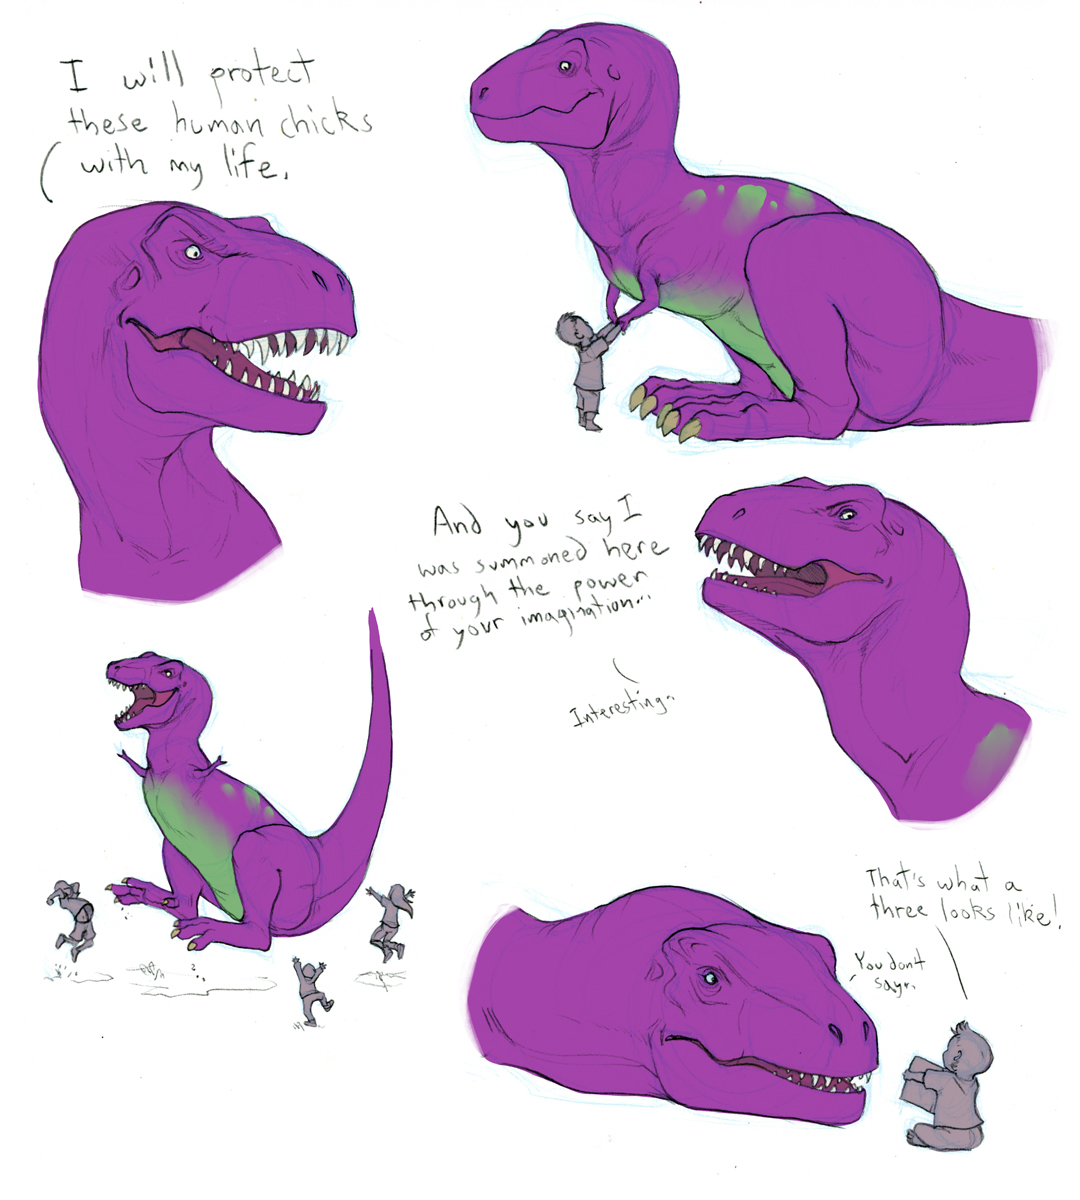 Barney only he's just a regular T Rex who doesn't know why he's been left in charge of young mammals or where their parents are, but he's a total dad so he's gonna do it.